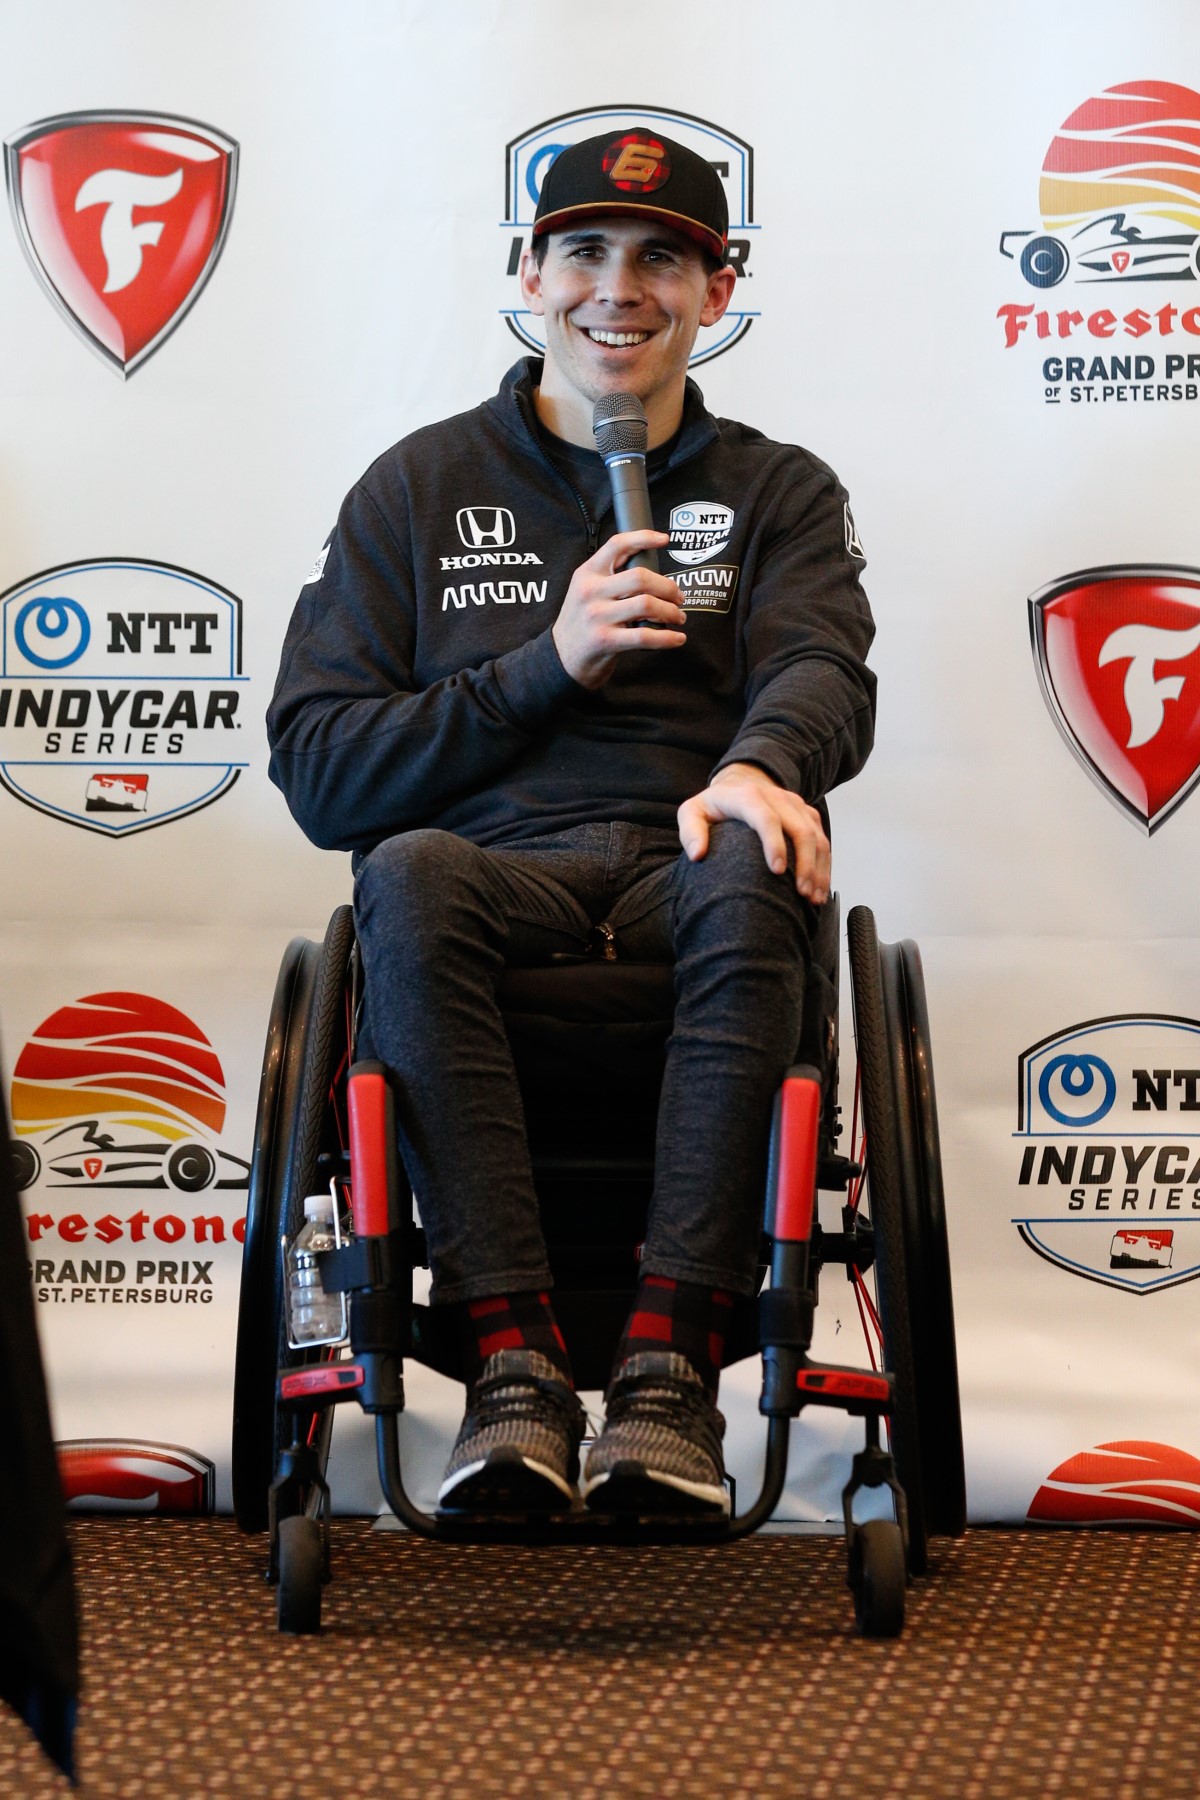 Wickens said if he does not regain full use of his legs, he will race with hand controls. One way or another, he plans to race again